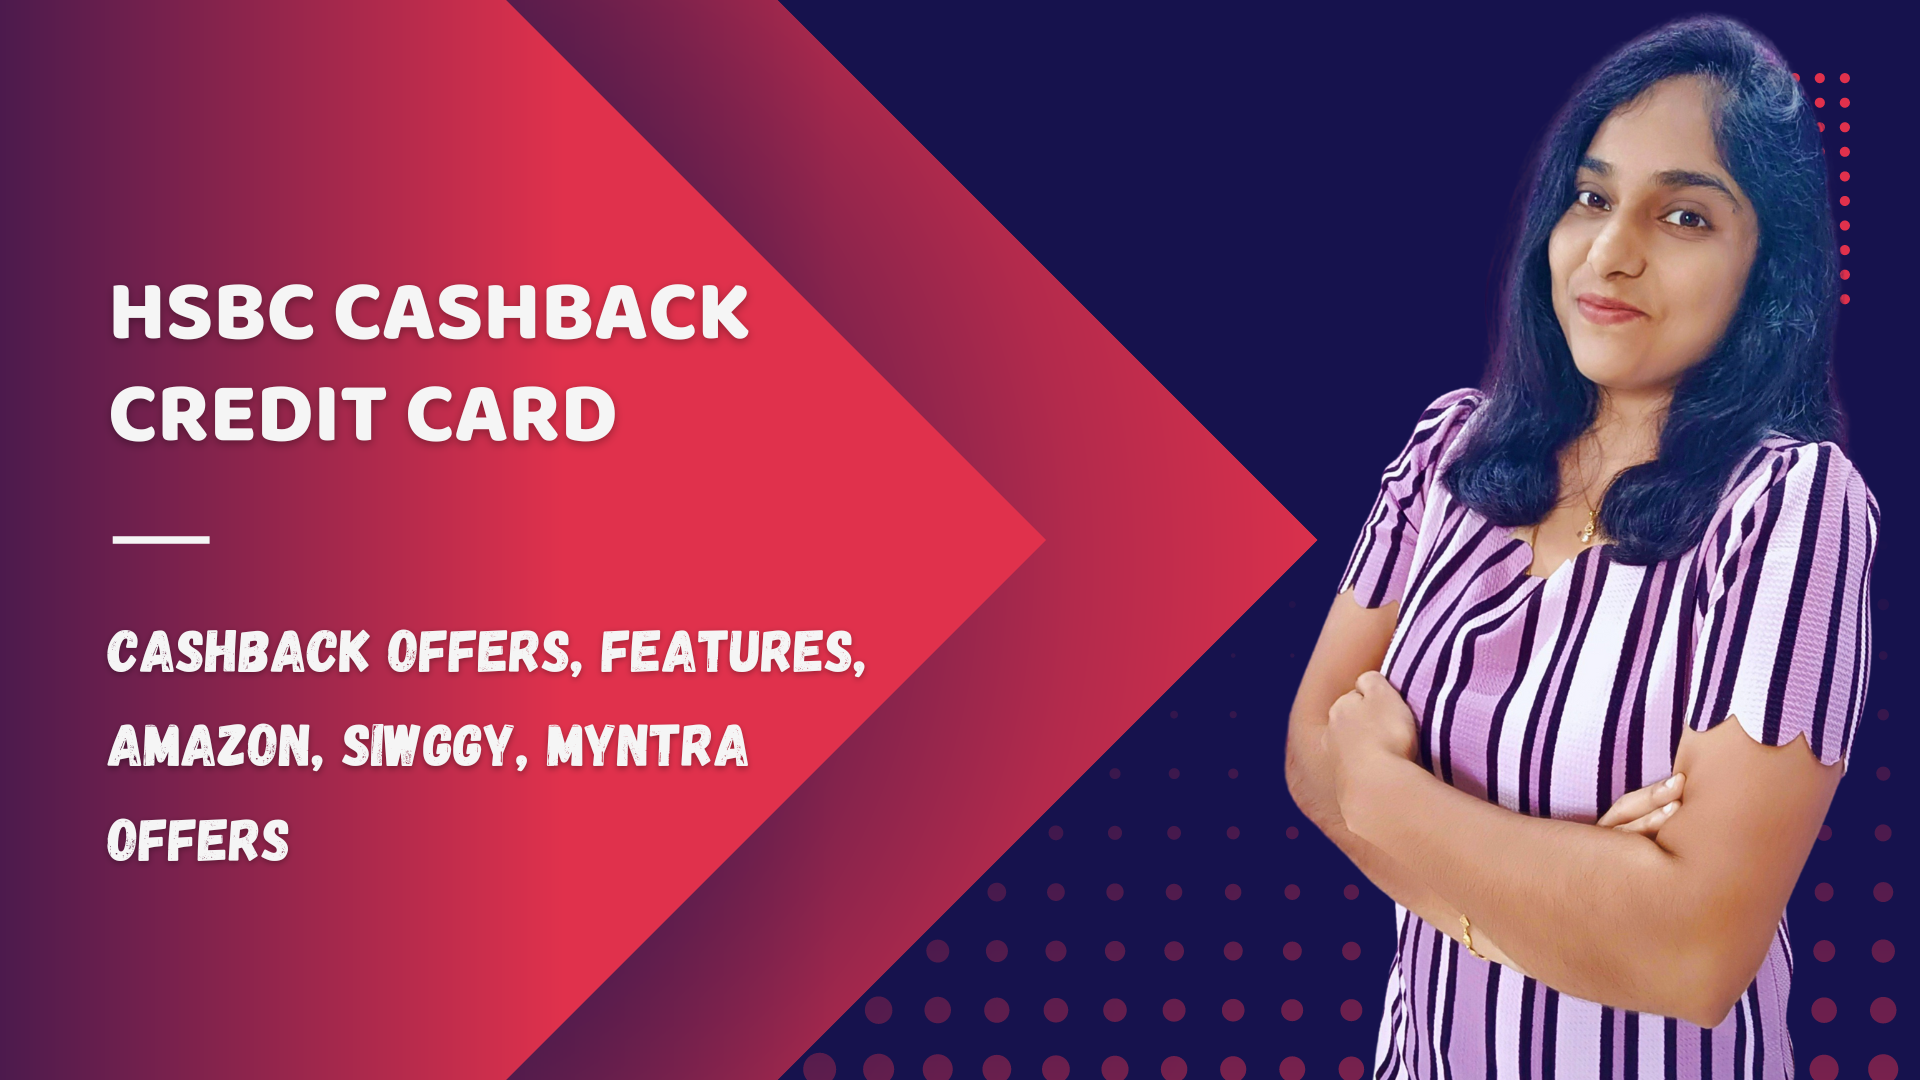 HSBC Cashback Credit Card | Cashback Offers, Features, Amazon, Swiggy, Myntra Offers